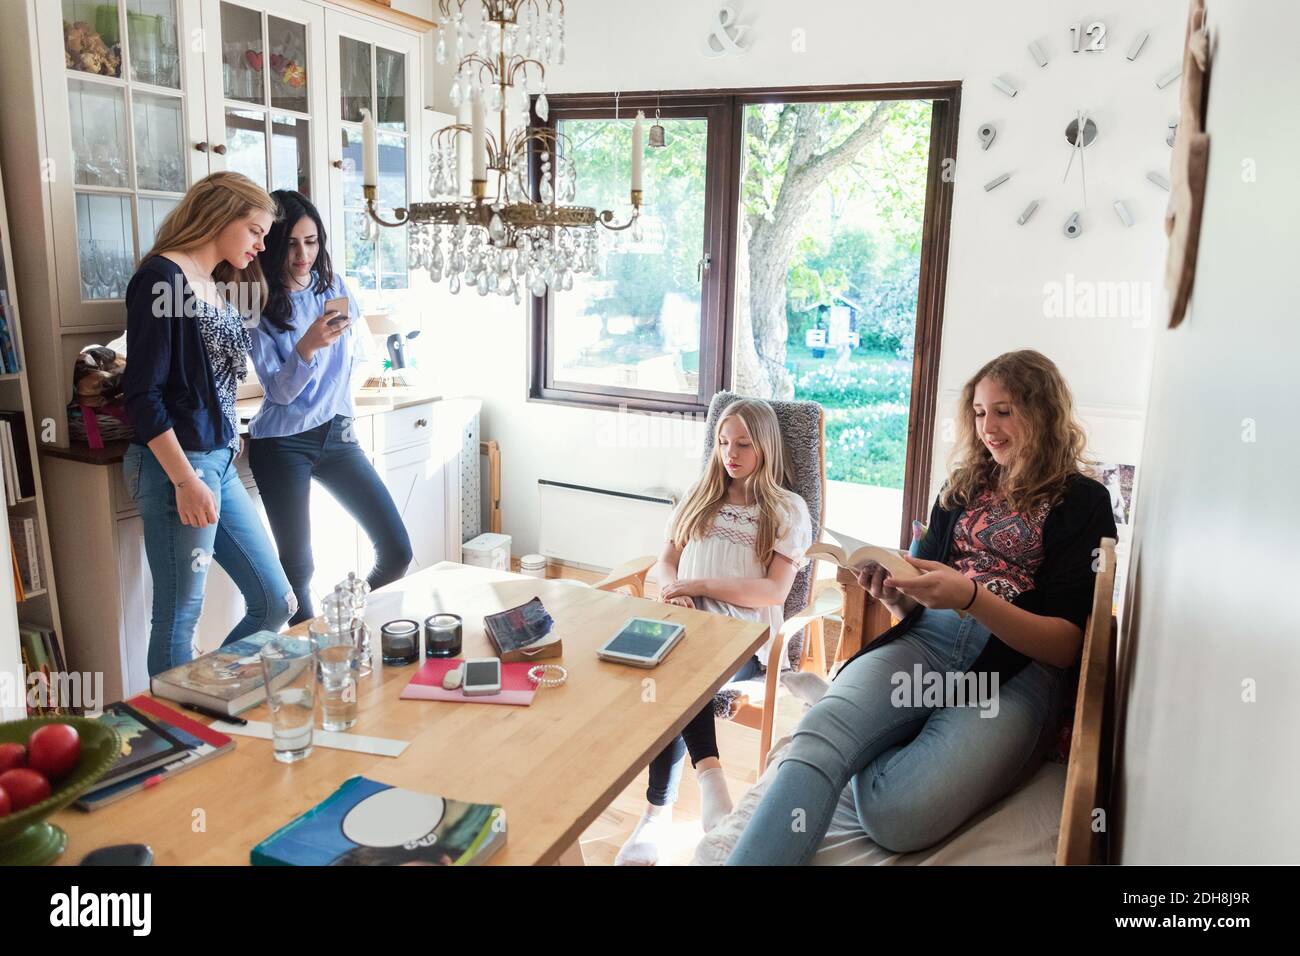 Teenage girls spending leisure time at home Stock Photo